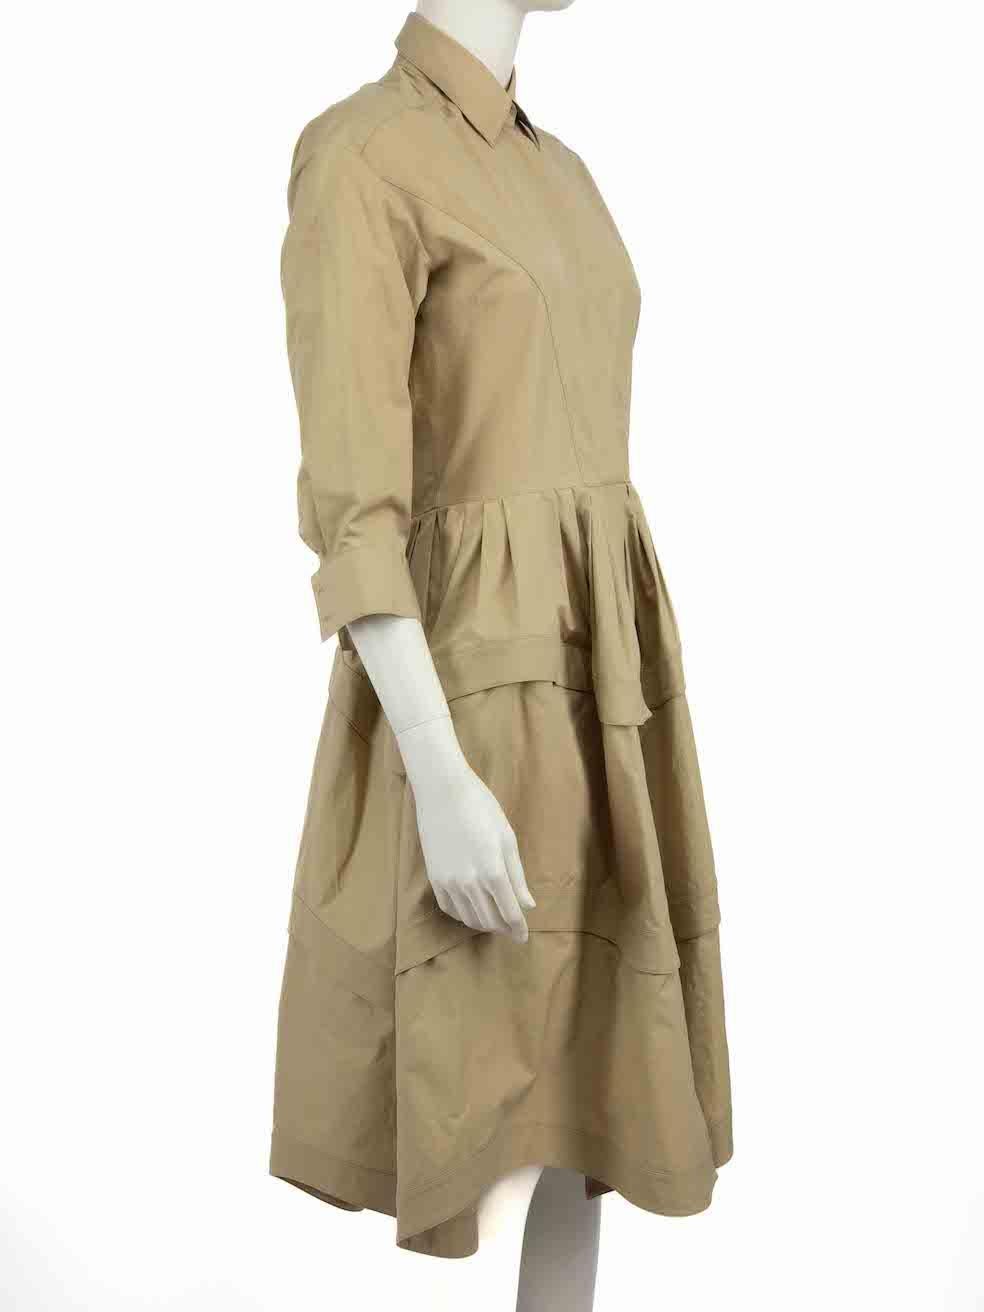 CONDITION is Very good. Minimal wear to dress is evident. Minimal small marks to centre front on this used Alaïa designer resale item.
 
 
 
 Details
 
 
 Beige
 
 Cotton
 
 Shirt dress
 
 Midi
 
 Pleated detail
 
 Button up fastening
 
 Long